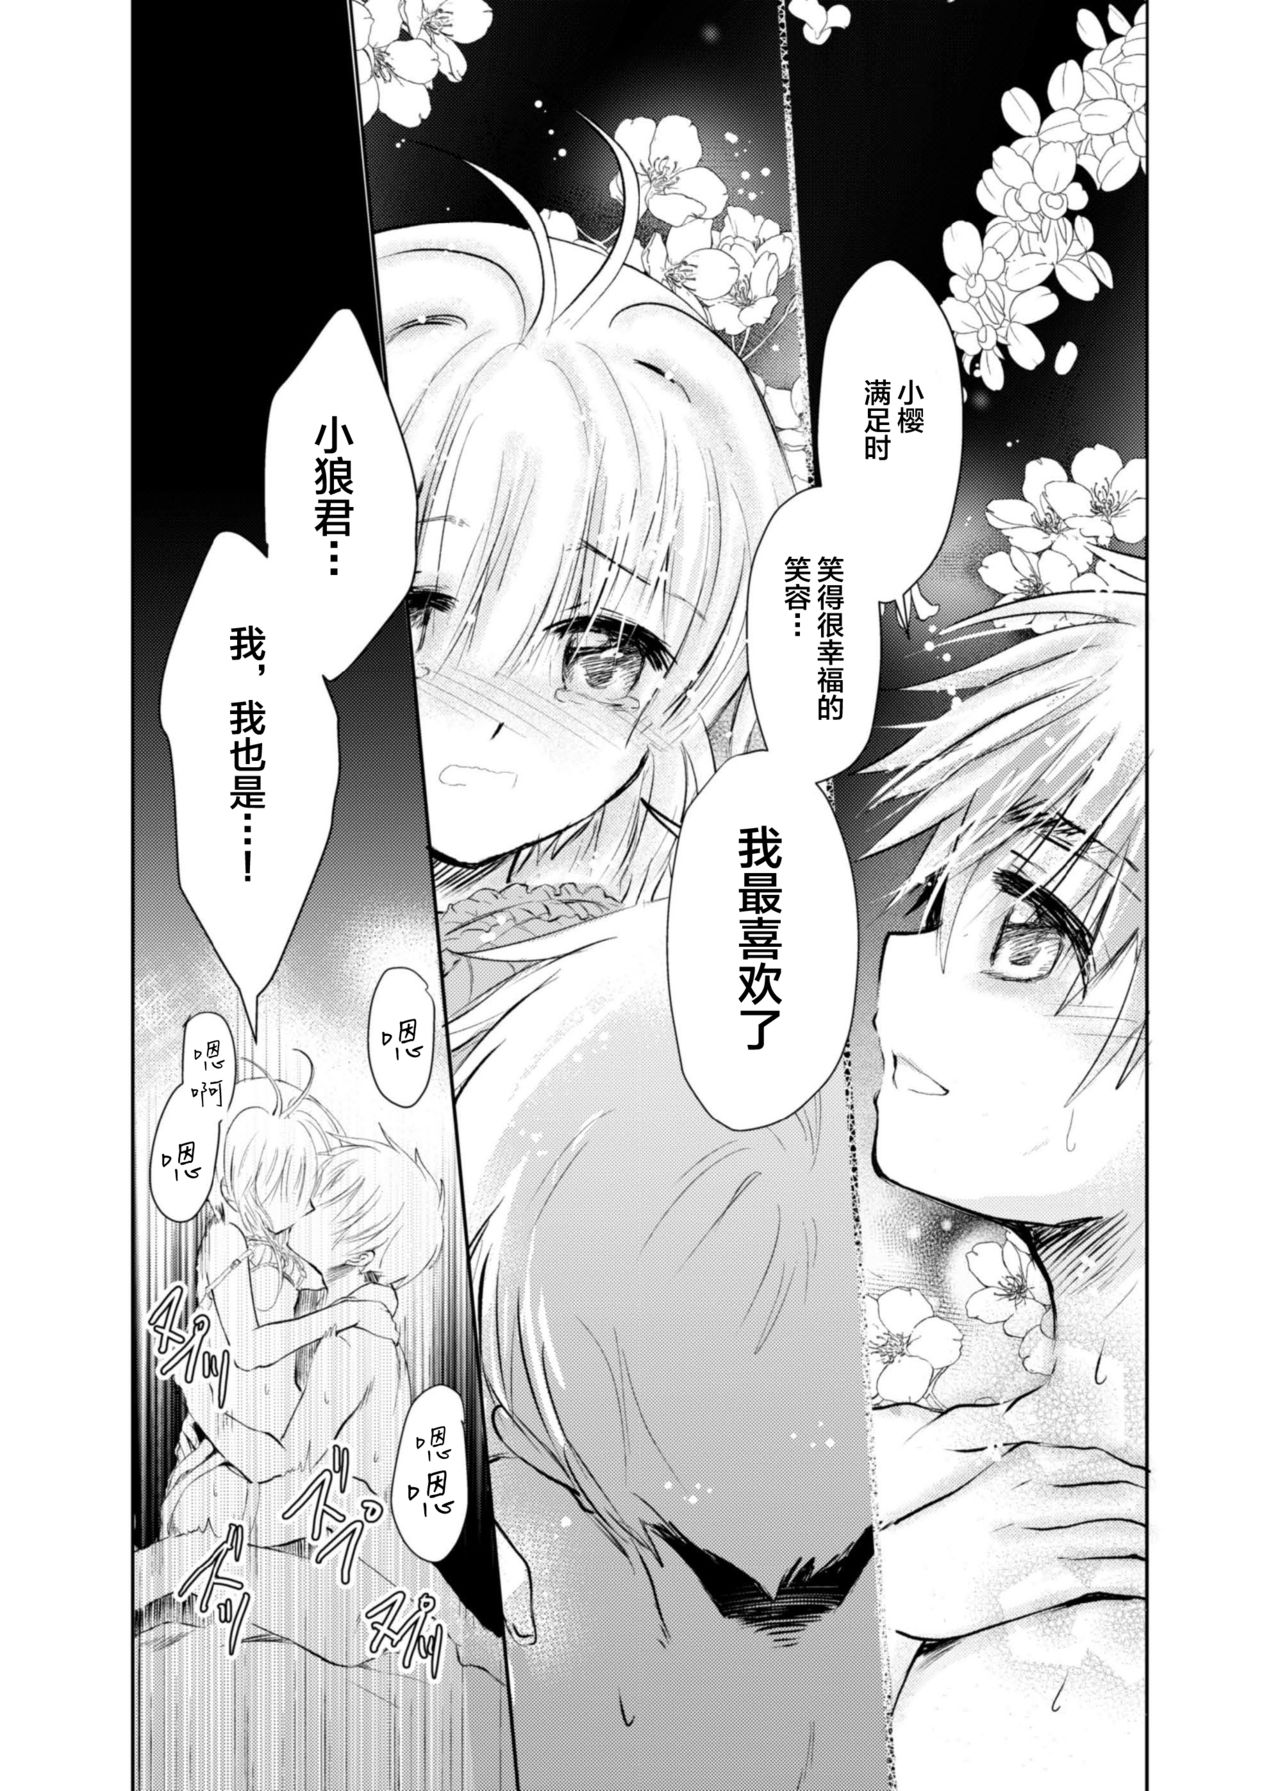 [Maple of Forest (Kaede Sago)] Give and Take (Cardcaptor Sakura) [Chinese] [新桥月白日语社] [Digital] page 29 full